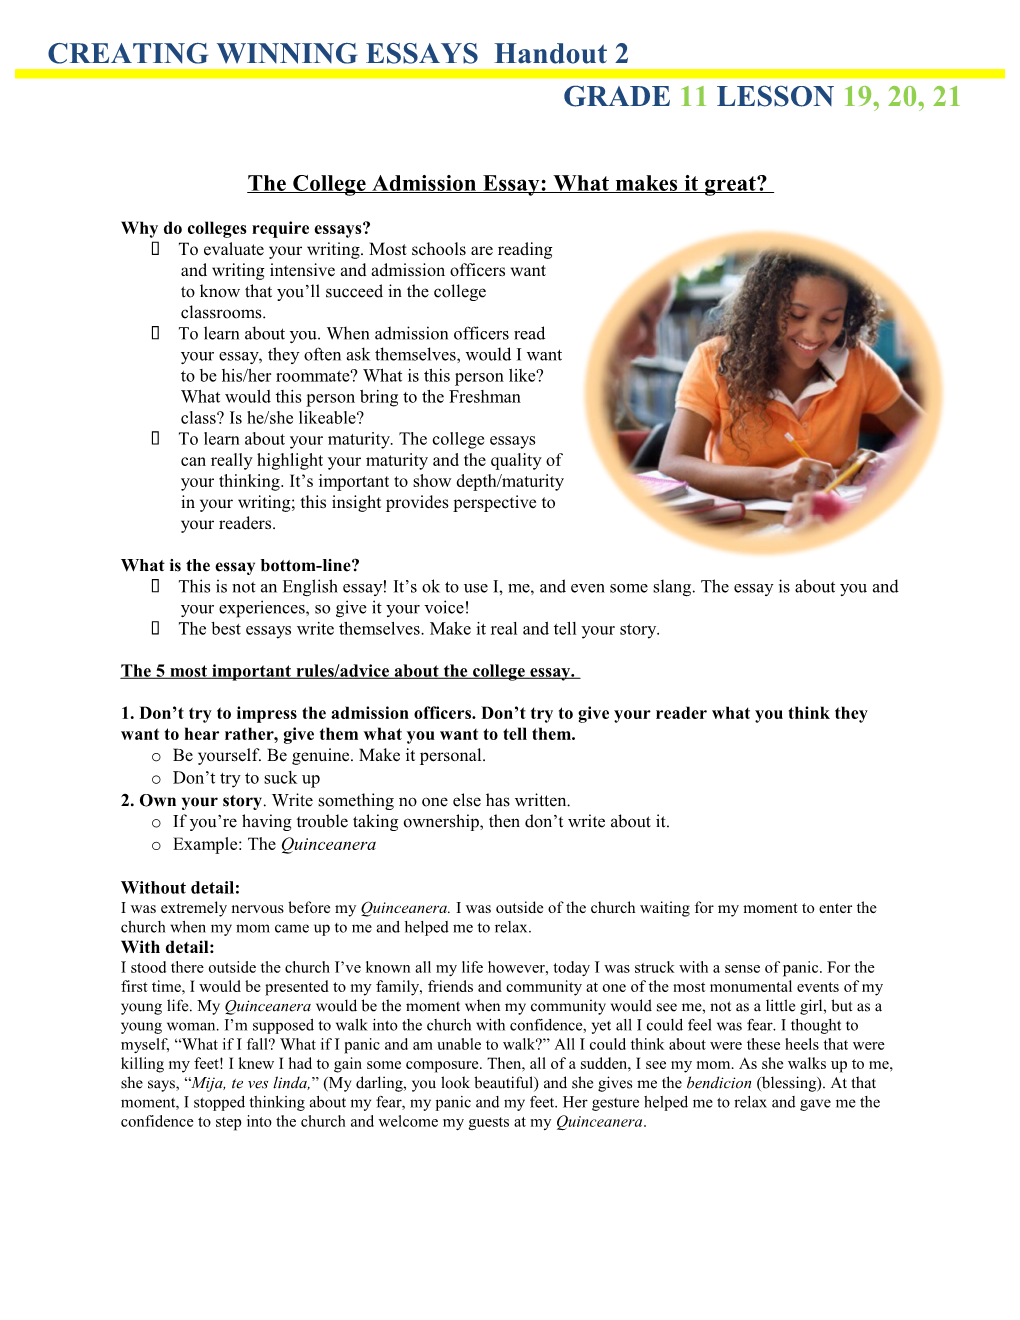 The College Admission Essay: What Makes It Great?